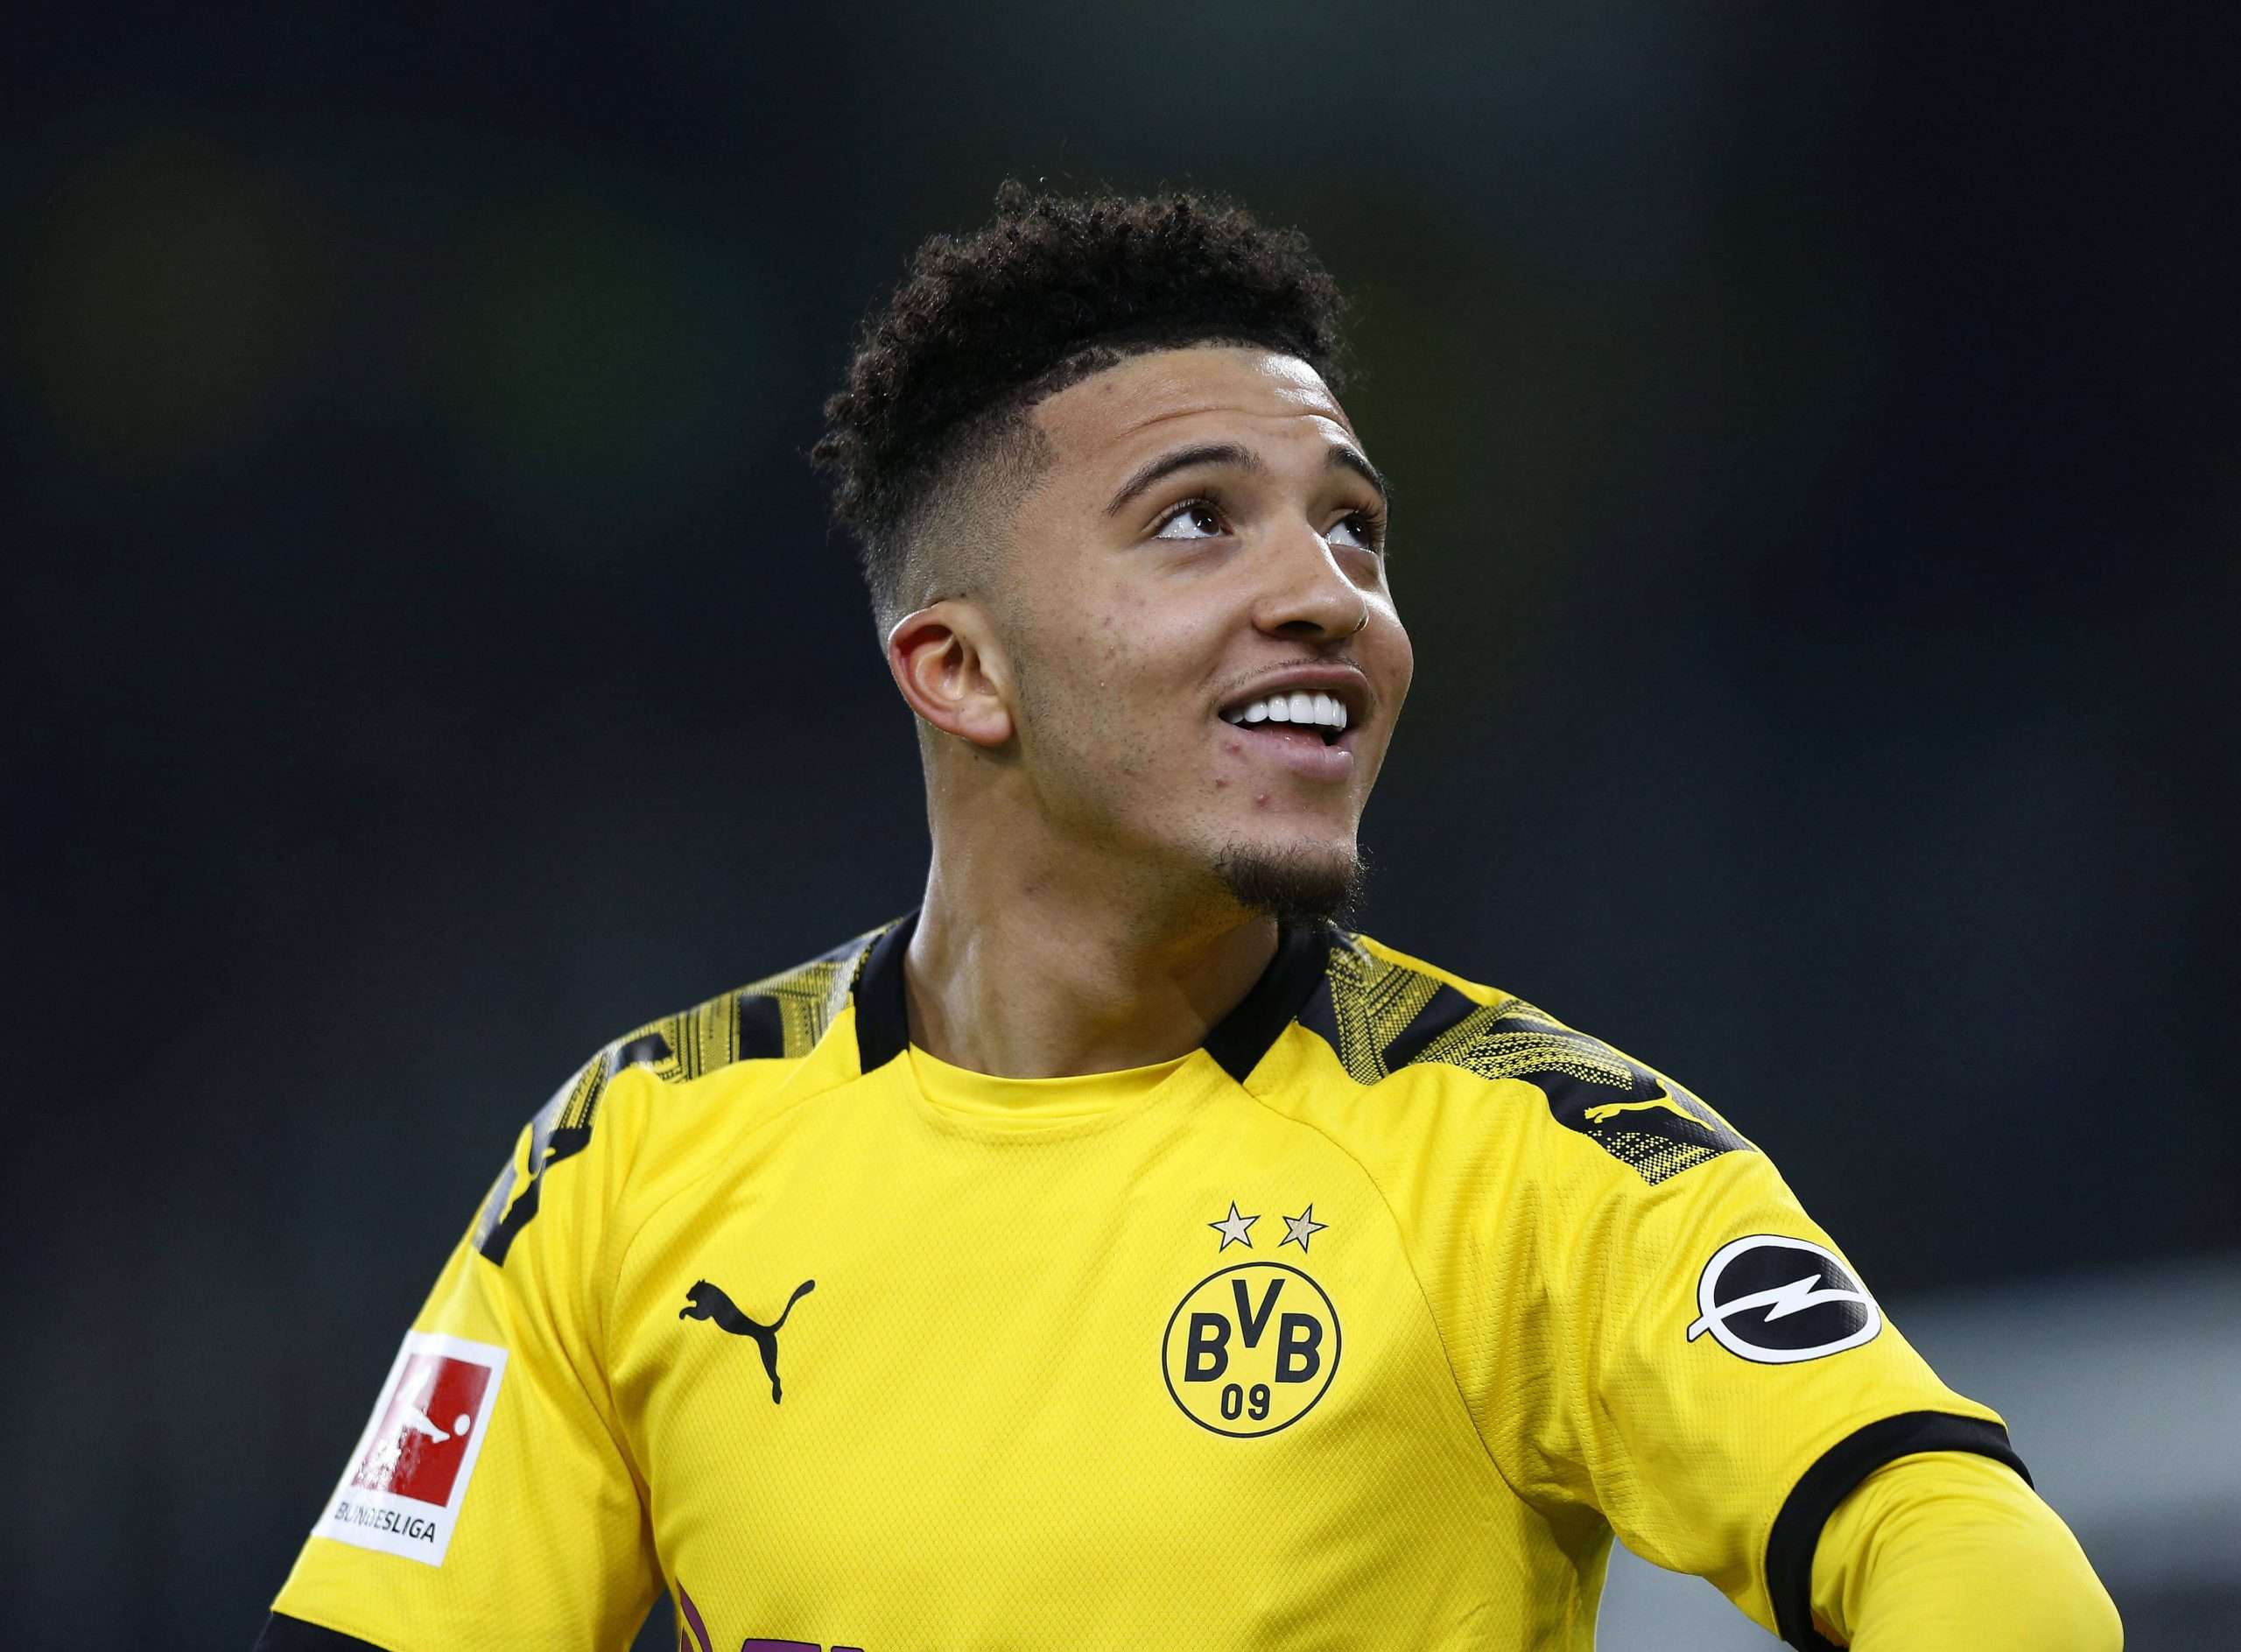 Jadon Sancho Signed New Borussia Dortmund Contract Until 2023 In Secret No Exit Clause Included Get German Football Newsget German Football News